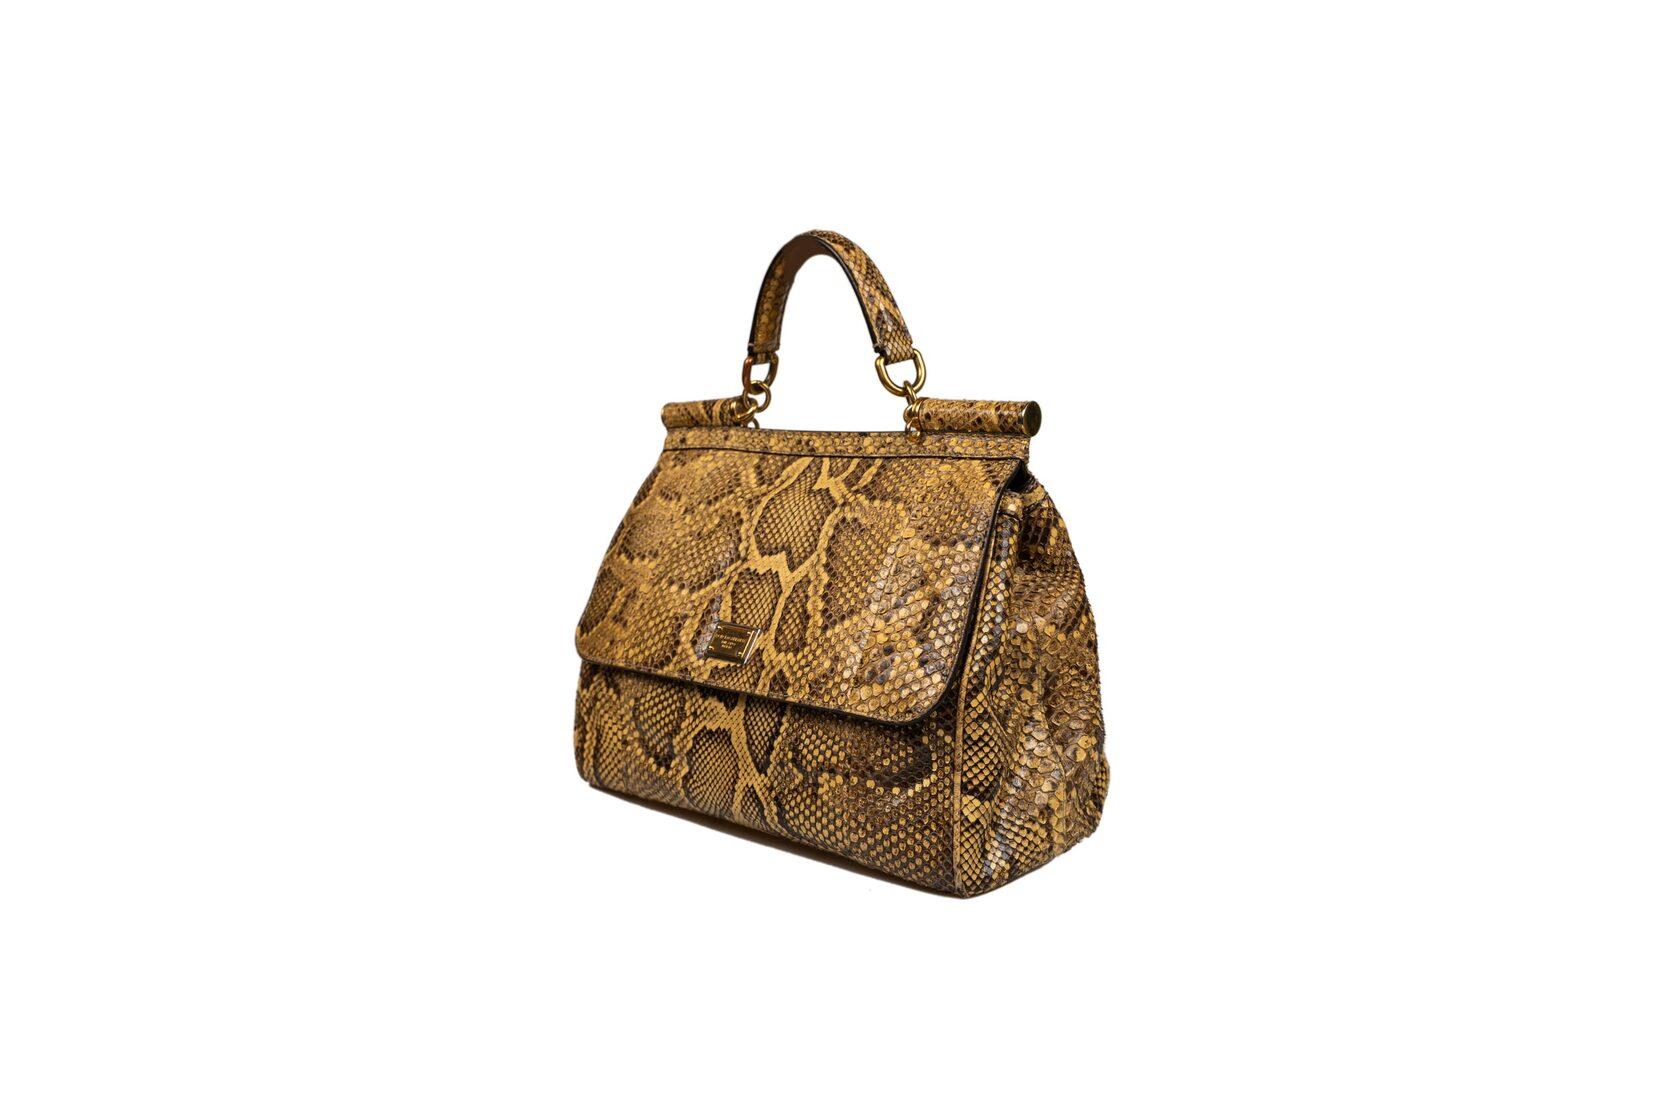 Dolce Gabbana Sicily Tote Bag Python Leather For Sale 5